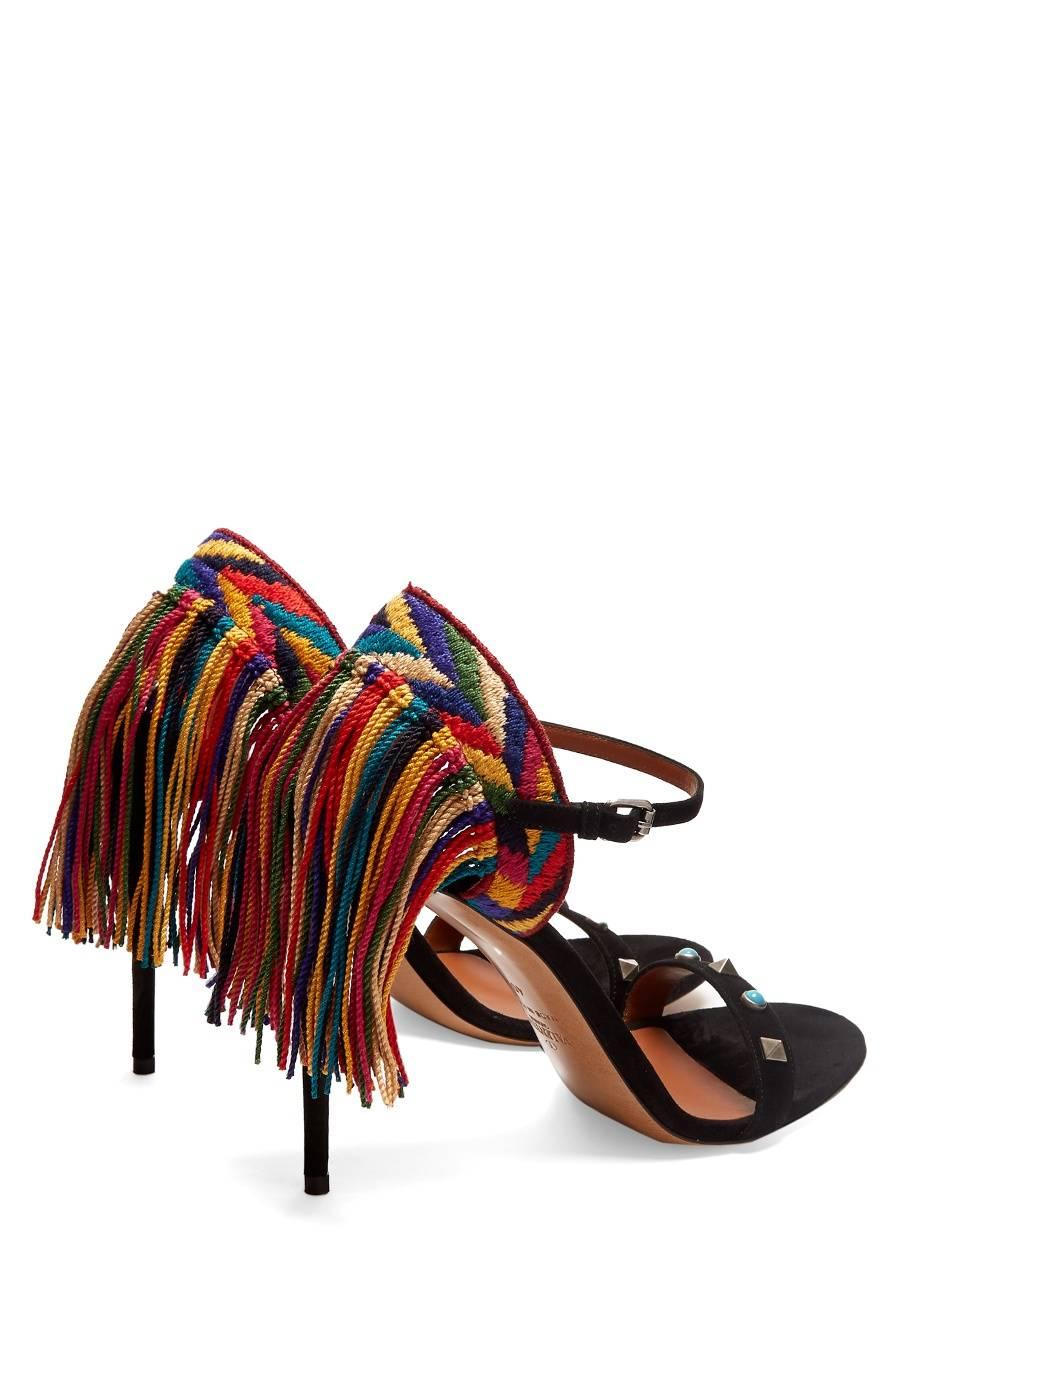 CURATOR'S NOTES

LAST PAIR! Valentino New Sold Out Black Suede Rainbow Tassel Evening Sandals Heels in Box  

Size IT 36.5
Suede
Metal hardware
Adjustable ankle buckle closure
Made in Italy
Heel height 4.25"
Includes original Valentino box